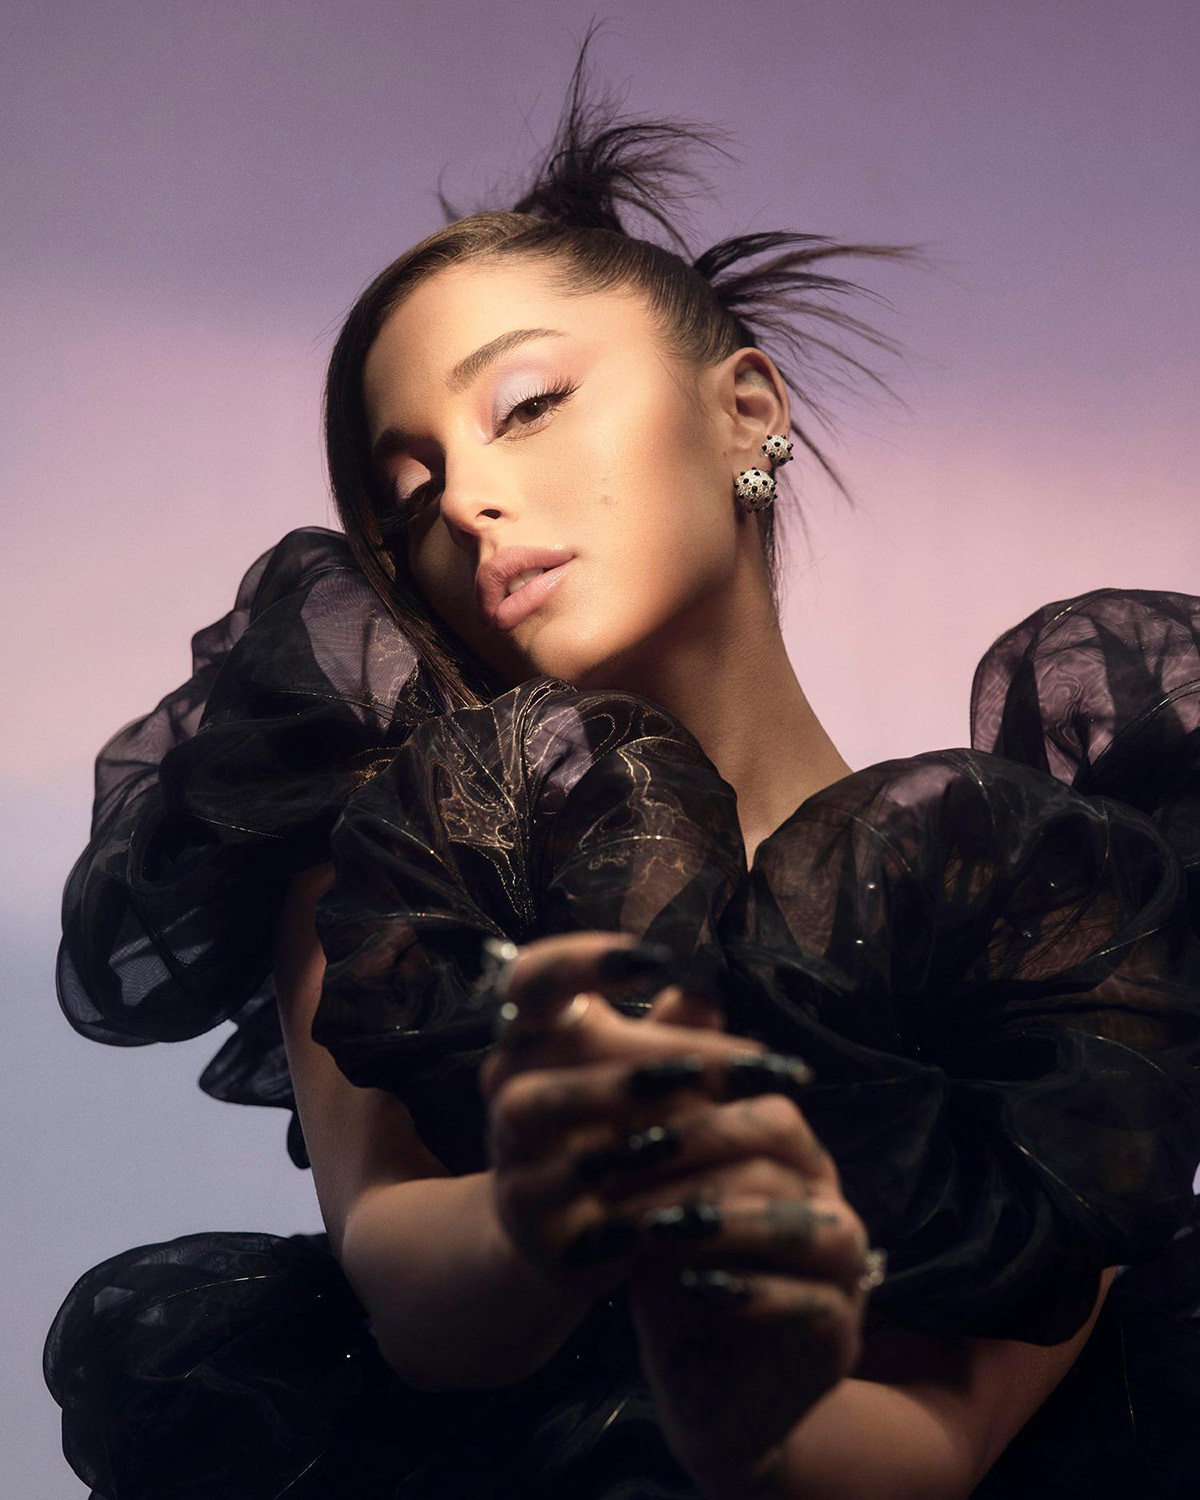 Ariana Grande covers Allure US October 2021 by Zoey Grossman